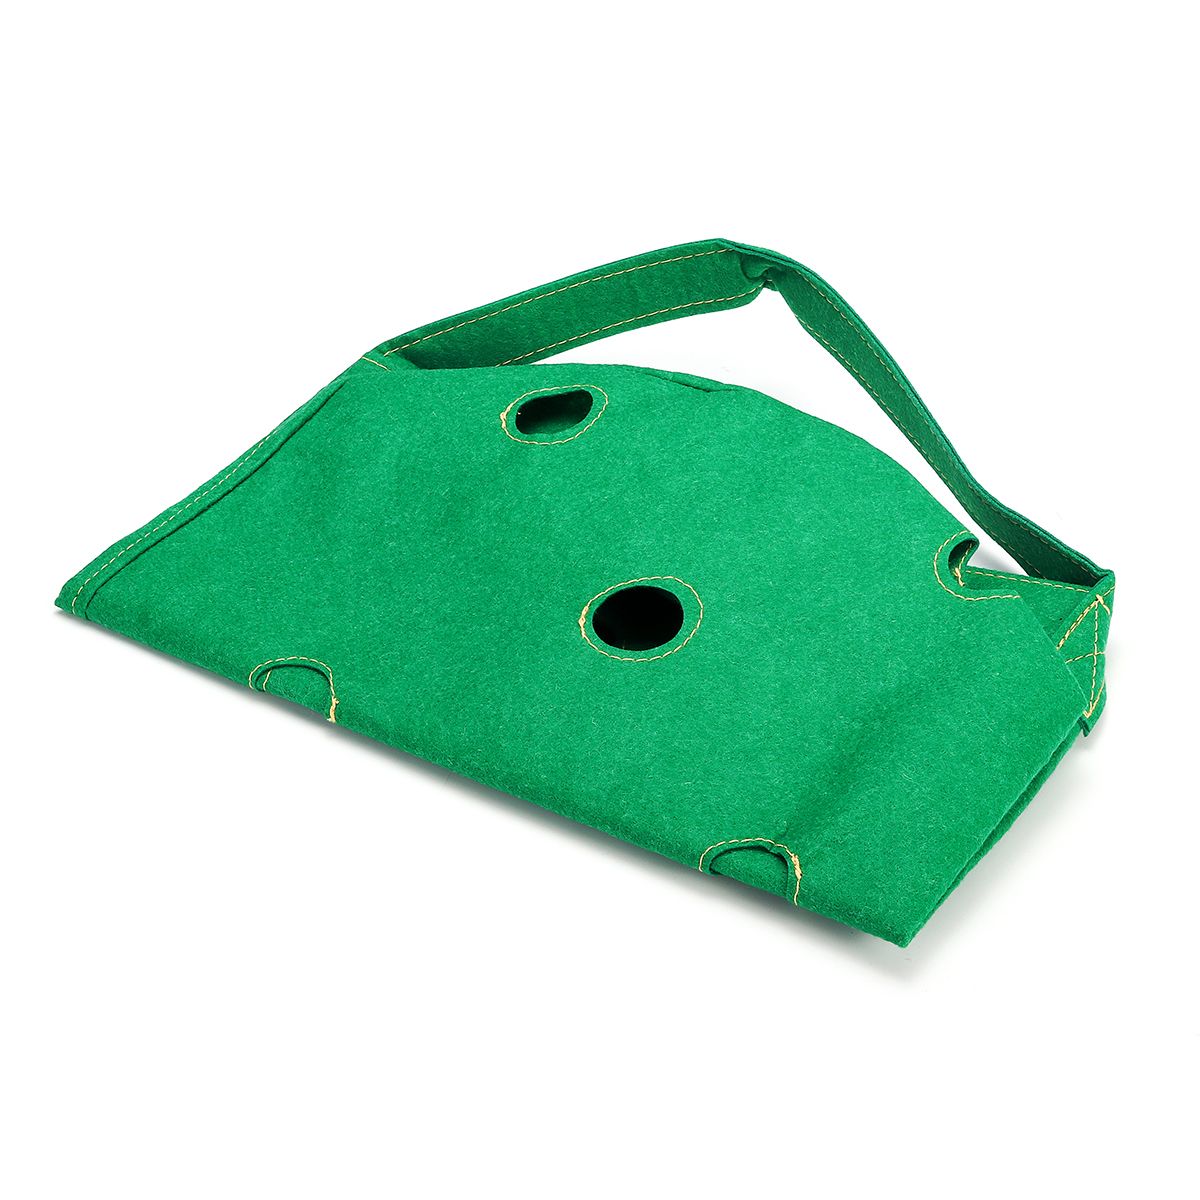 Hanging-Non-Woven-Felt-Vertical-Planter-Bag-11x-Pockets-For-Strawberry-Planting-Grow-Box-1478845